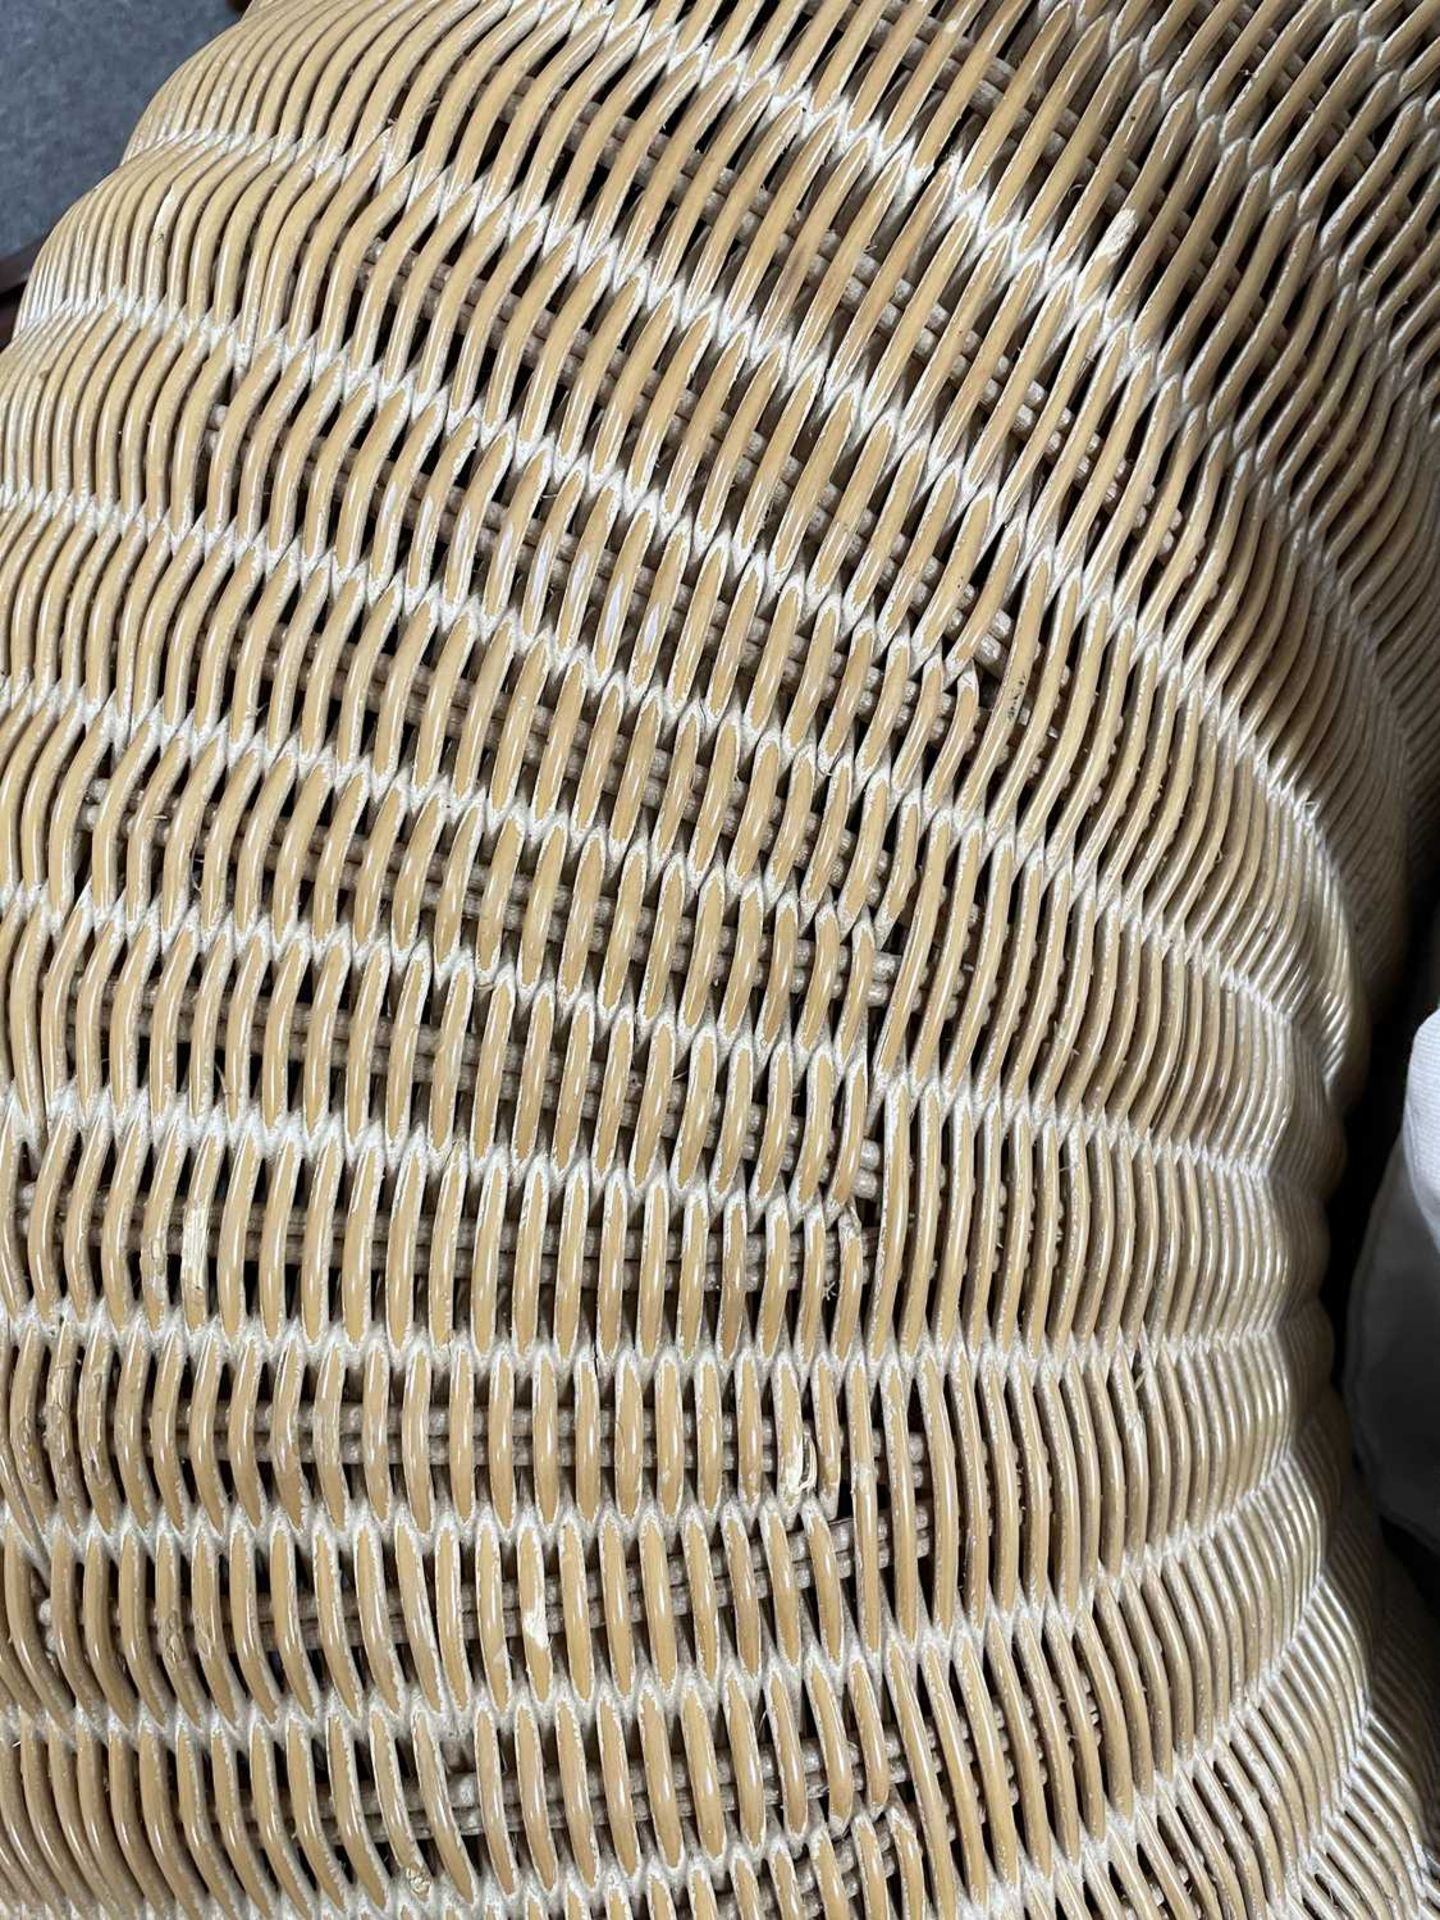 POINT FURNITURE - MODERNIST RATTAN ARMCHAIRS & TABLES - Image 3 of 5